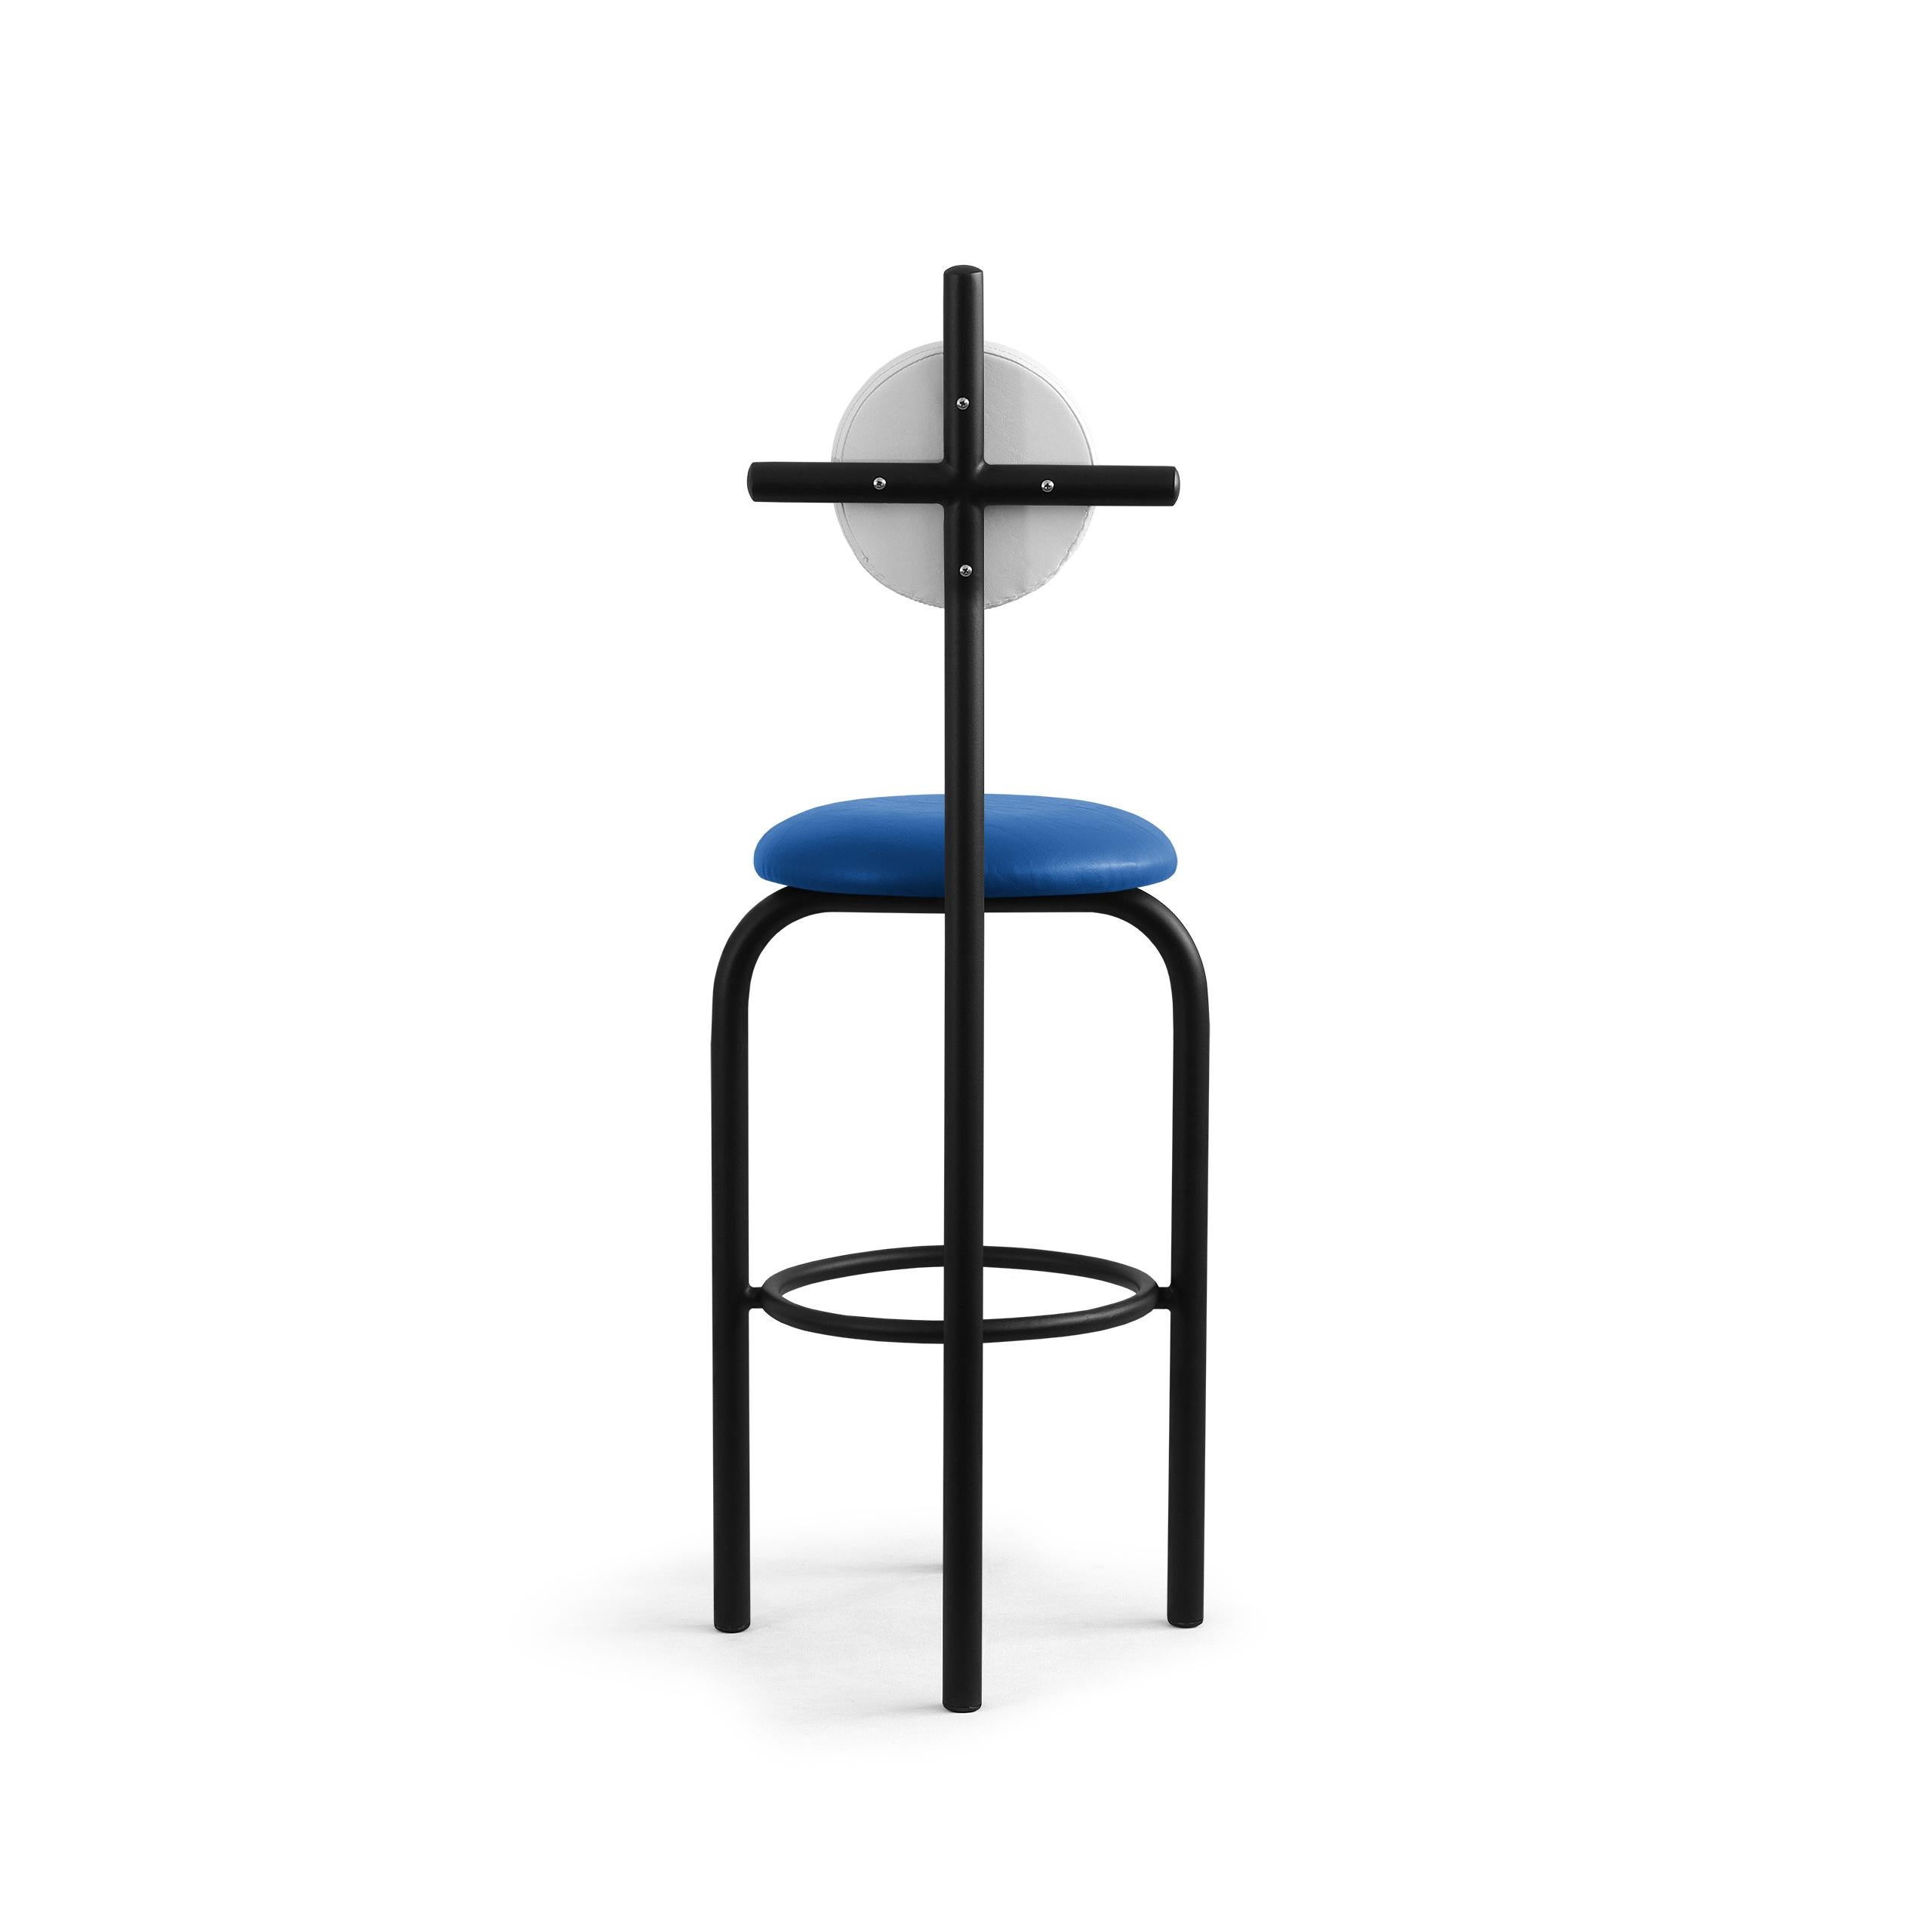 PK19 Impermeable Bar Stool, Blue Seat & Black Metal Structure by Paulo Kobylka In New Condition For Sale In Londrina, Paraná